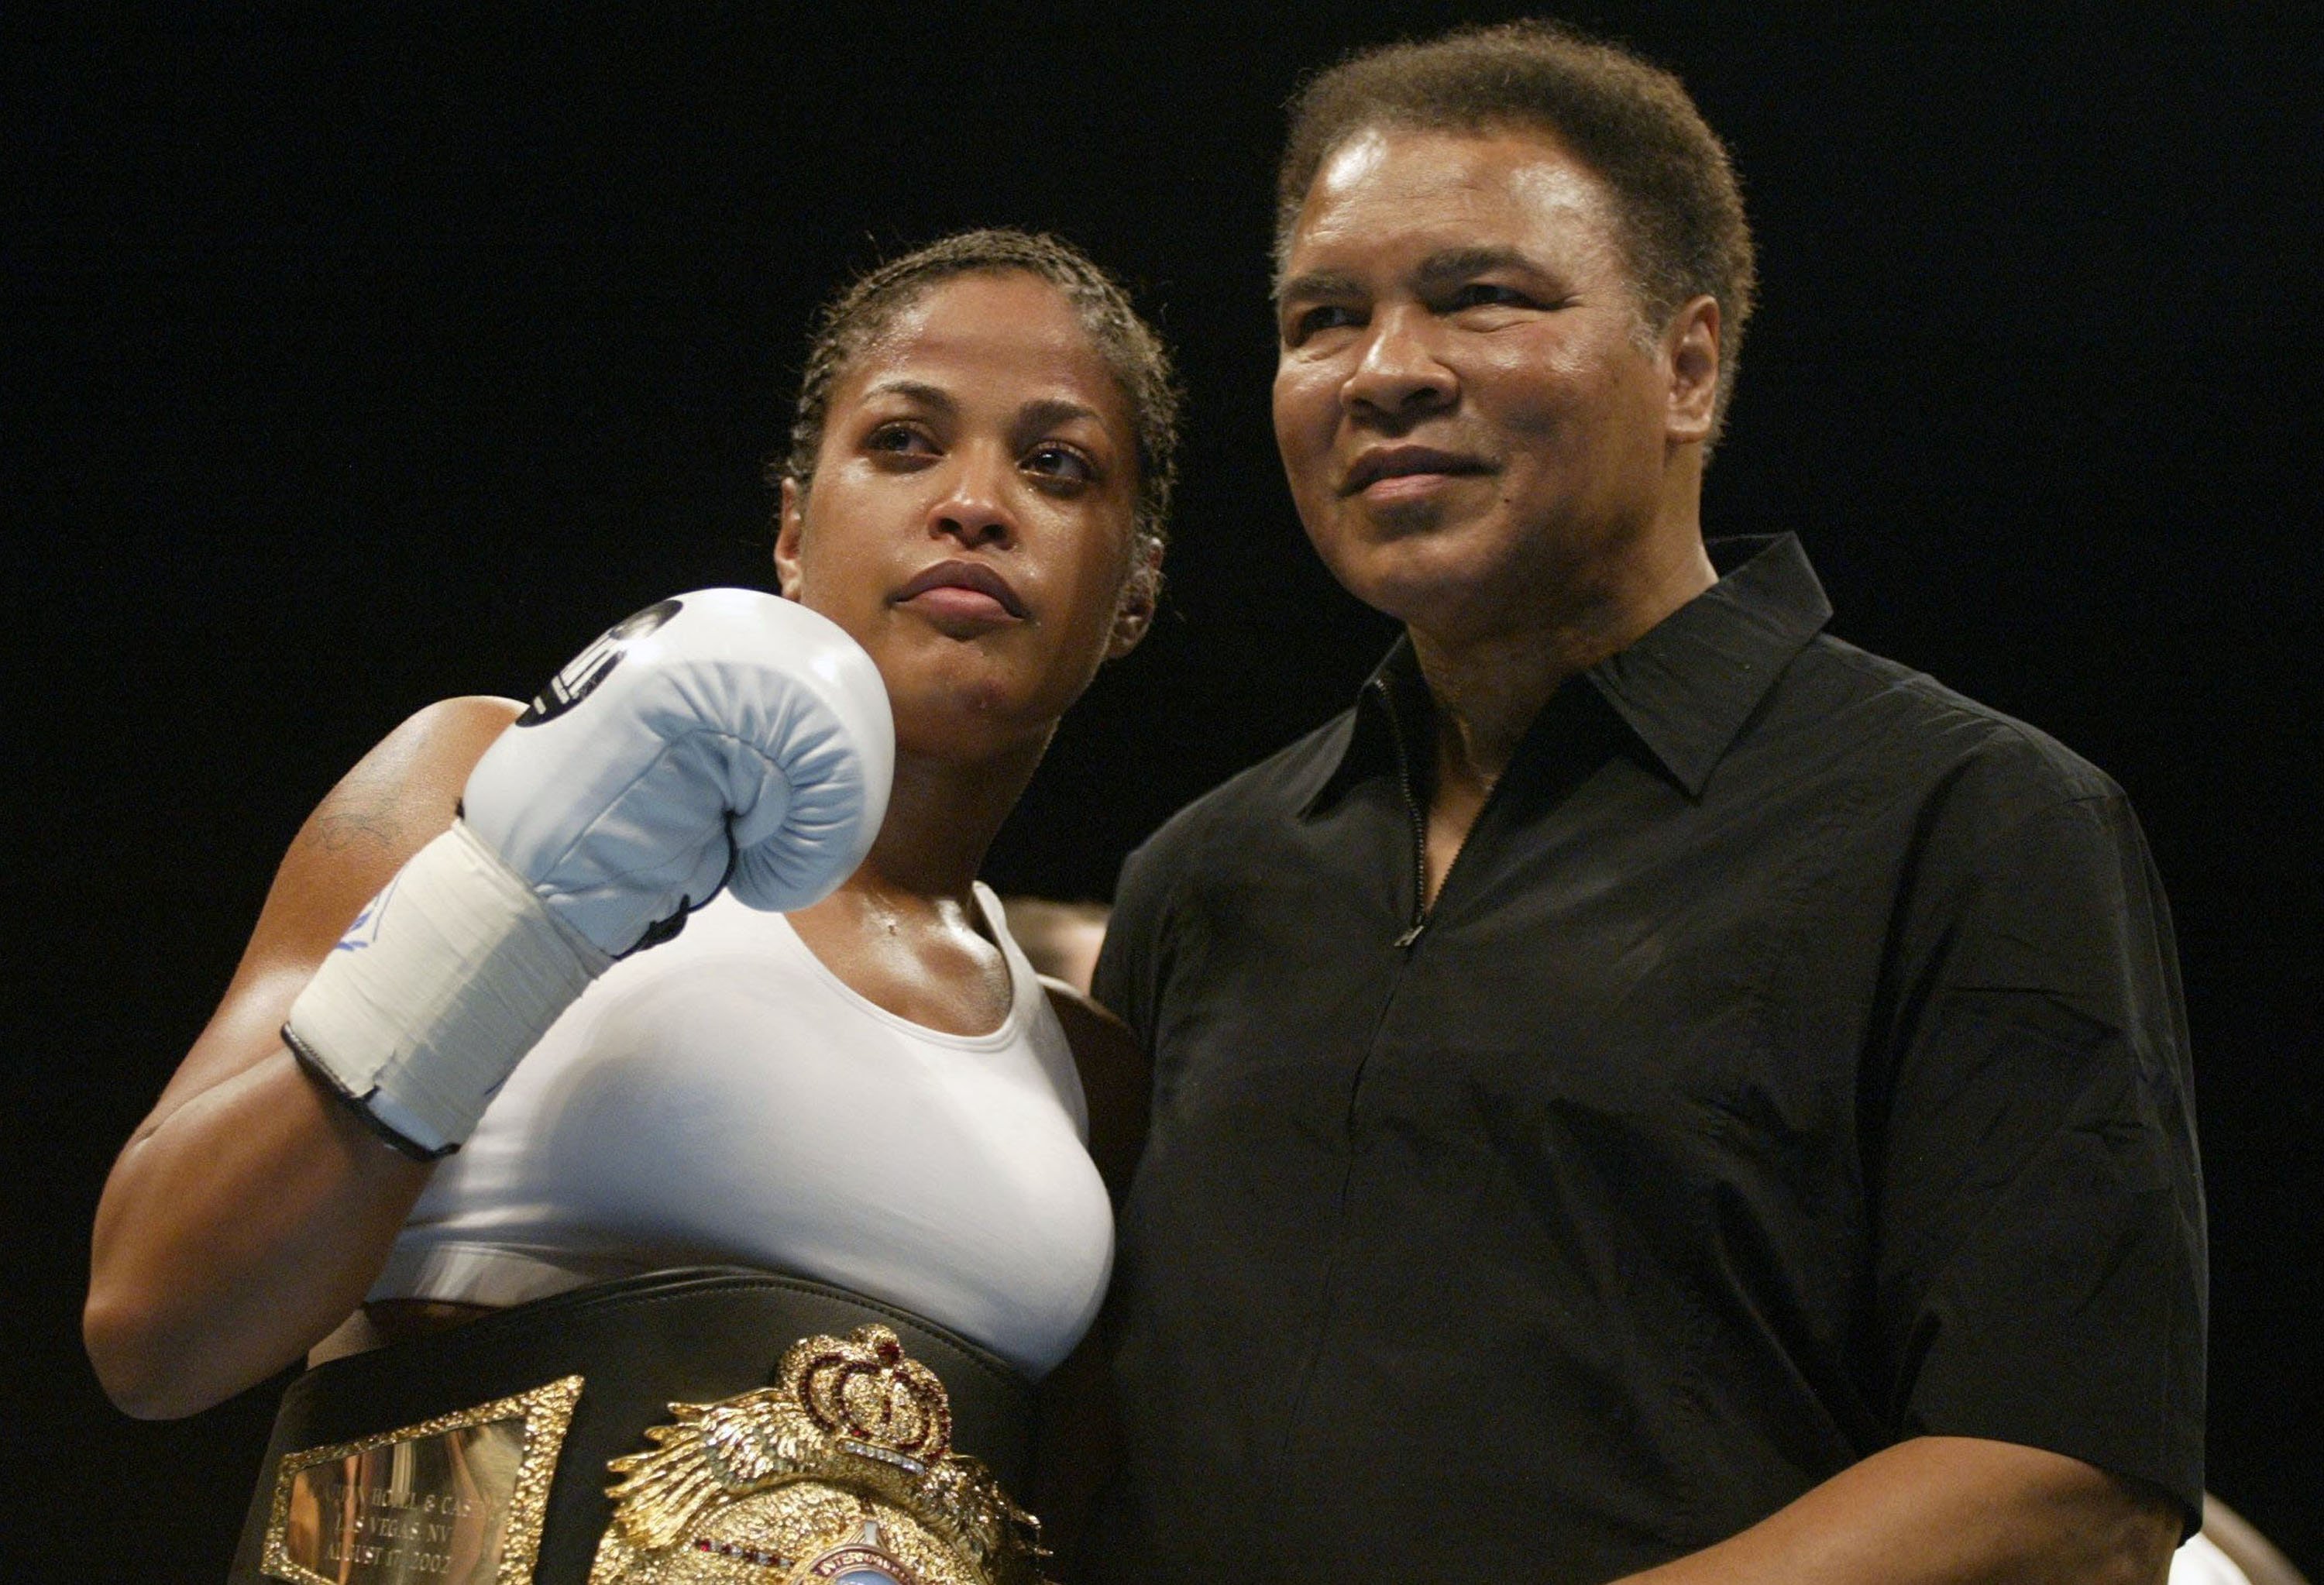 Laila Ali poses with her father, former boxer, Muhammad Ali, after defeating Suzy Taylor after two rounds at the Aladdin Casino on August 17, 2002 | Photo: GettyImages